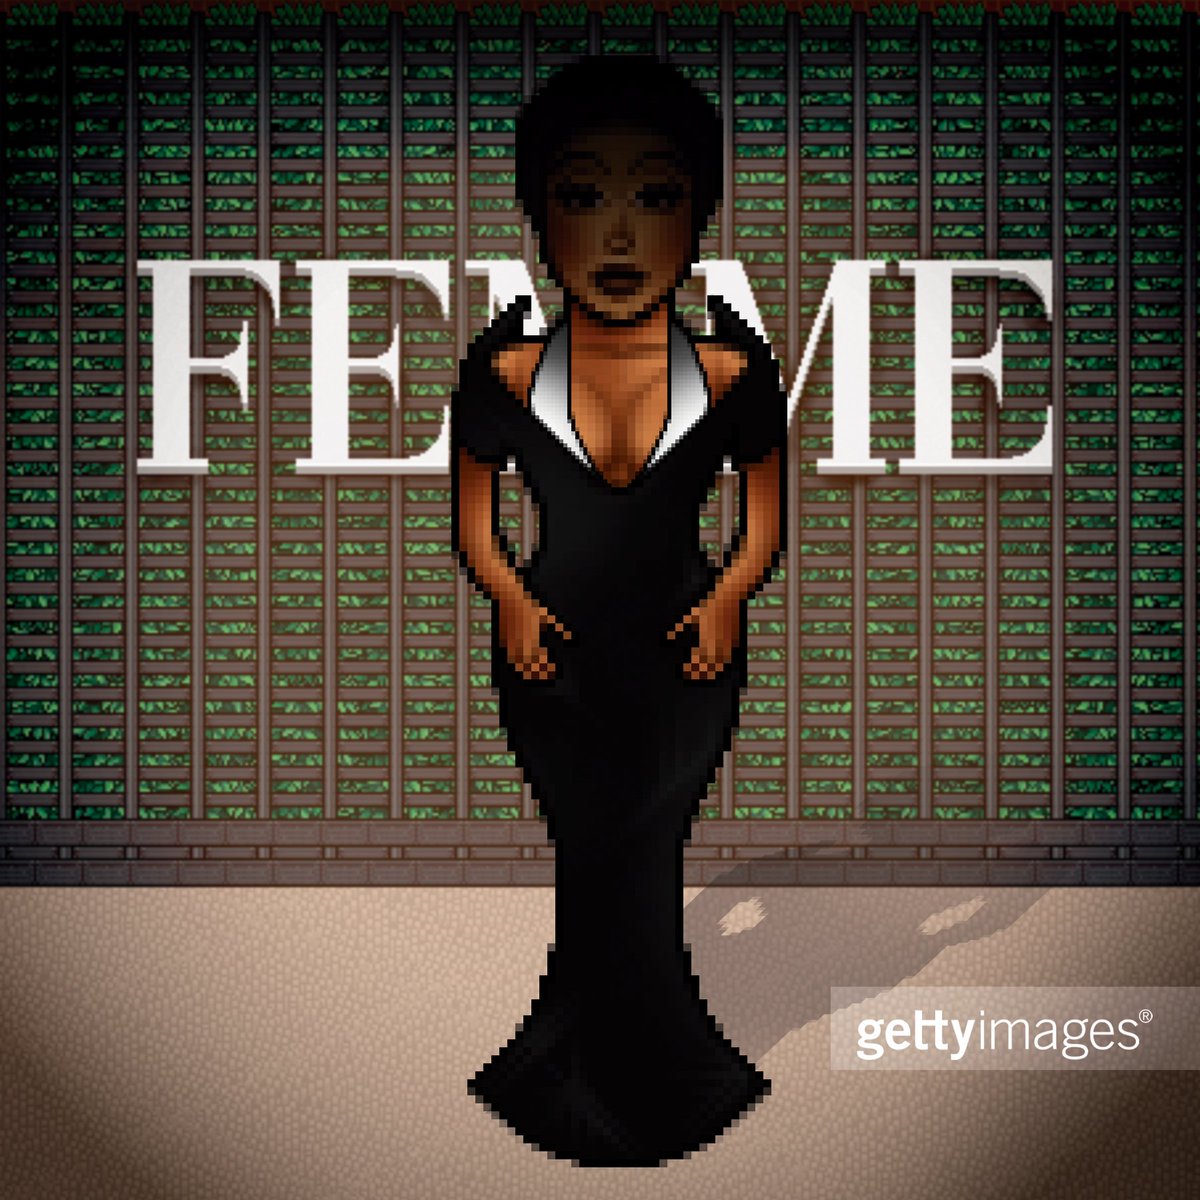 Mugler's Favorite. Styling: Sophie Emma 📸Repost: gettyimages #HFIxCovers @HabFIndustry @habccover